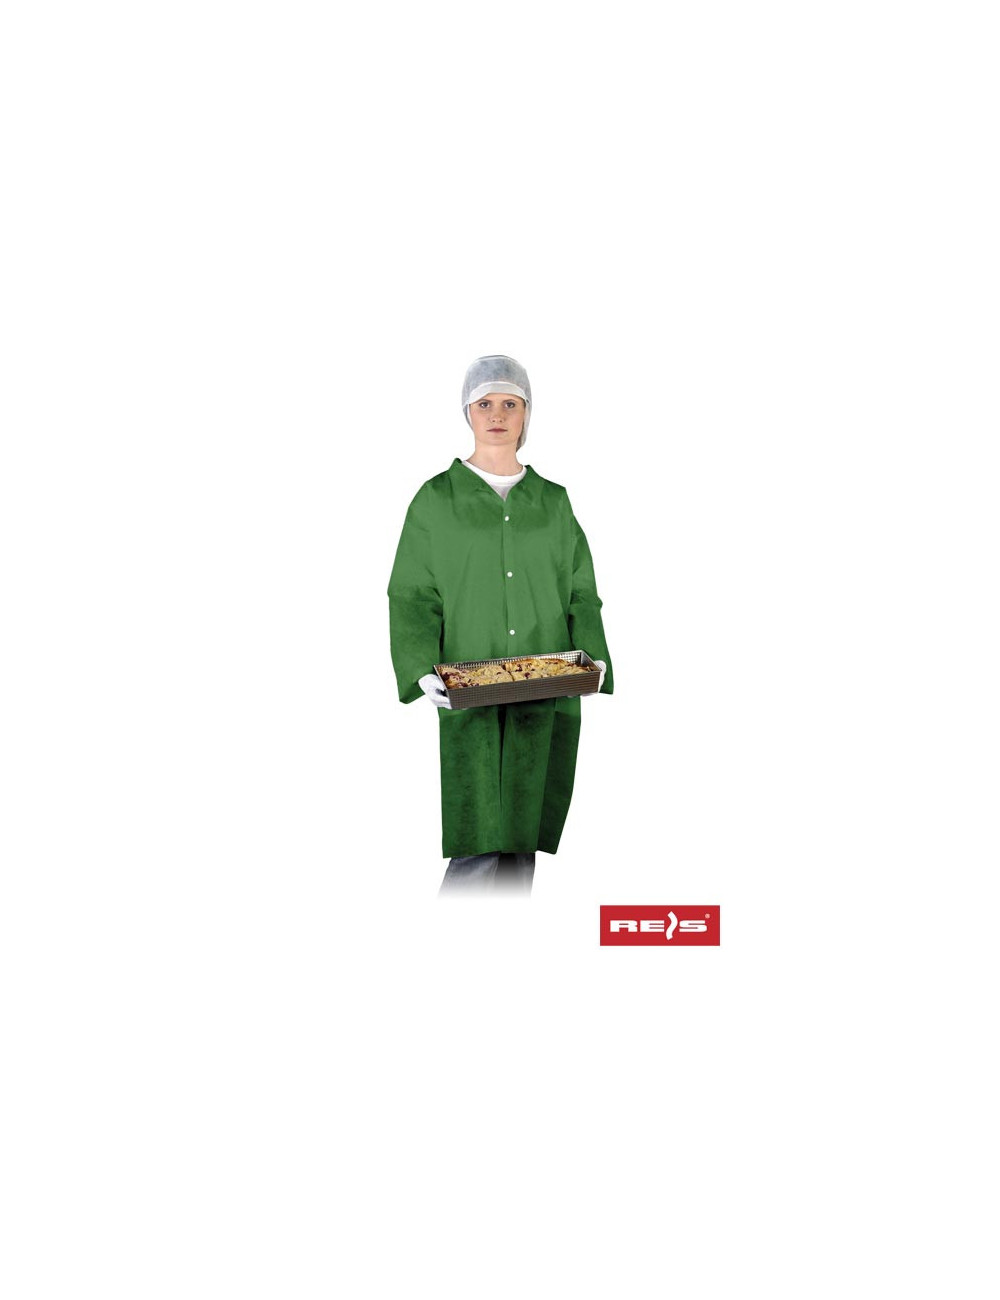 Flab apron with green Reis